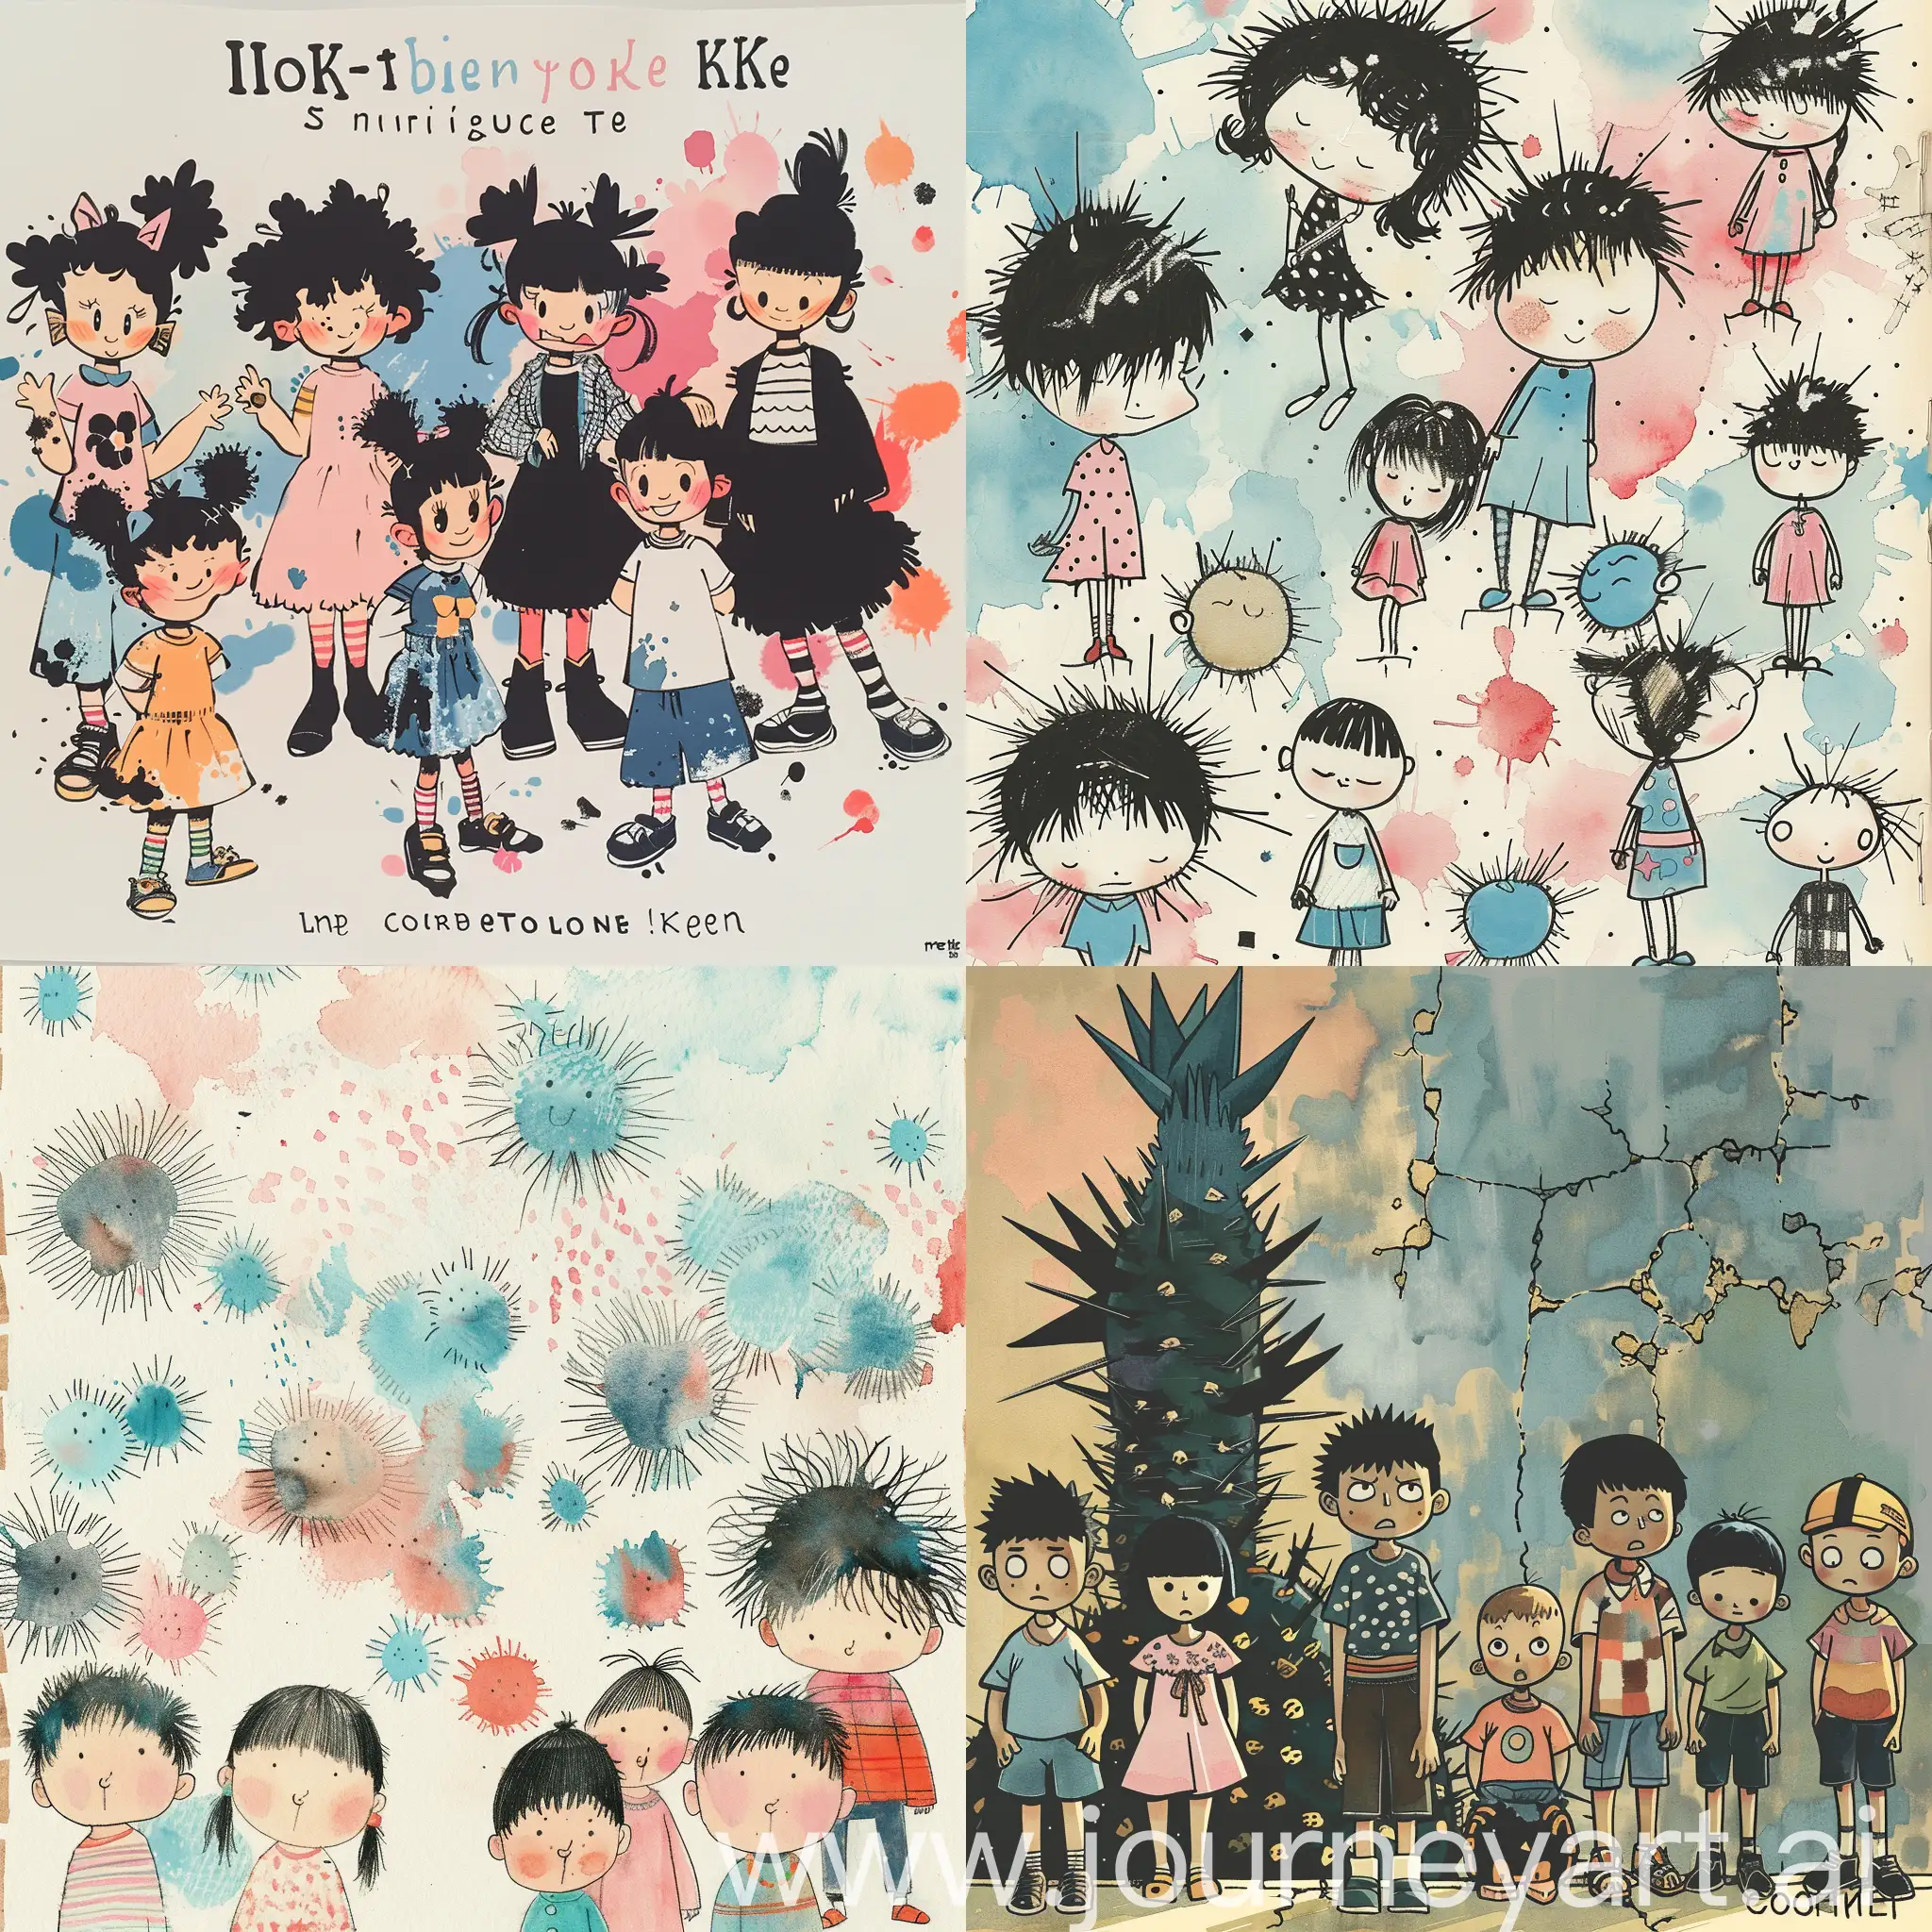 a cartoon showing several children, in the style of salon kei, dadaist photomontage, natural fibers, whimsical minimalism, sharp/prickly, 1990s, quirky character designs, background in color Cultured, pastel transparent watercolors, use the following colors, Light Cobalt Blue, American Pink, Eton Blue, Black, Sage--ar 52:31